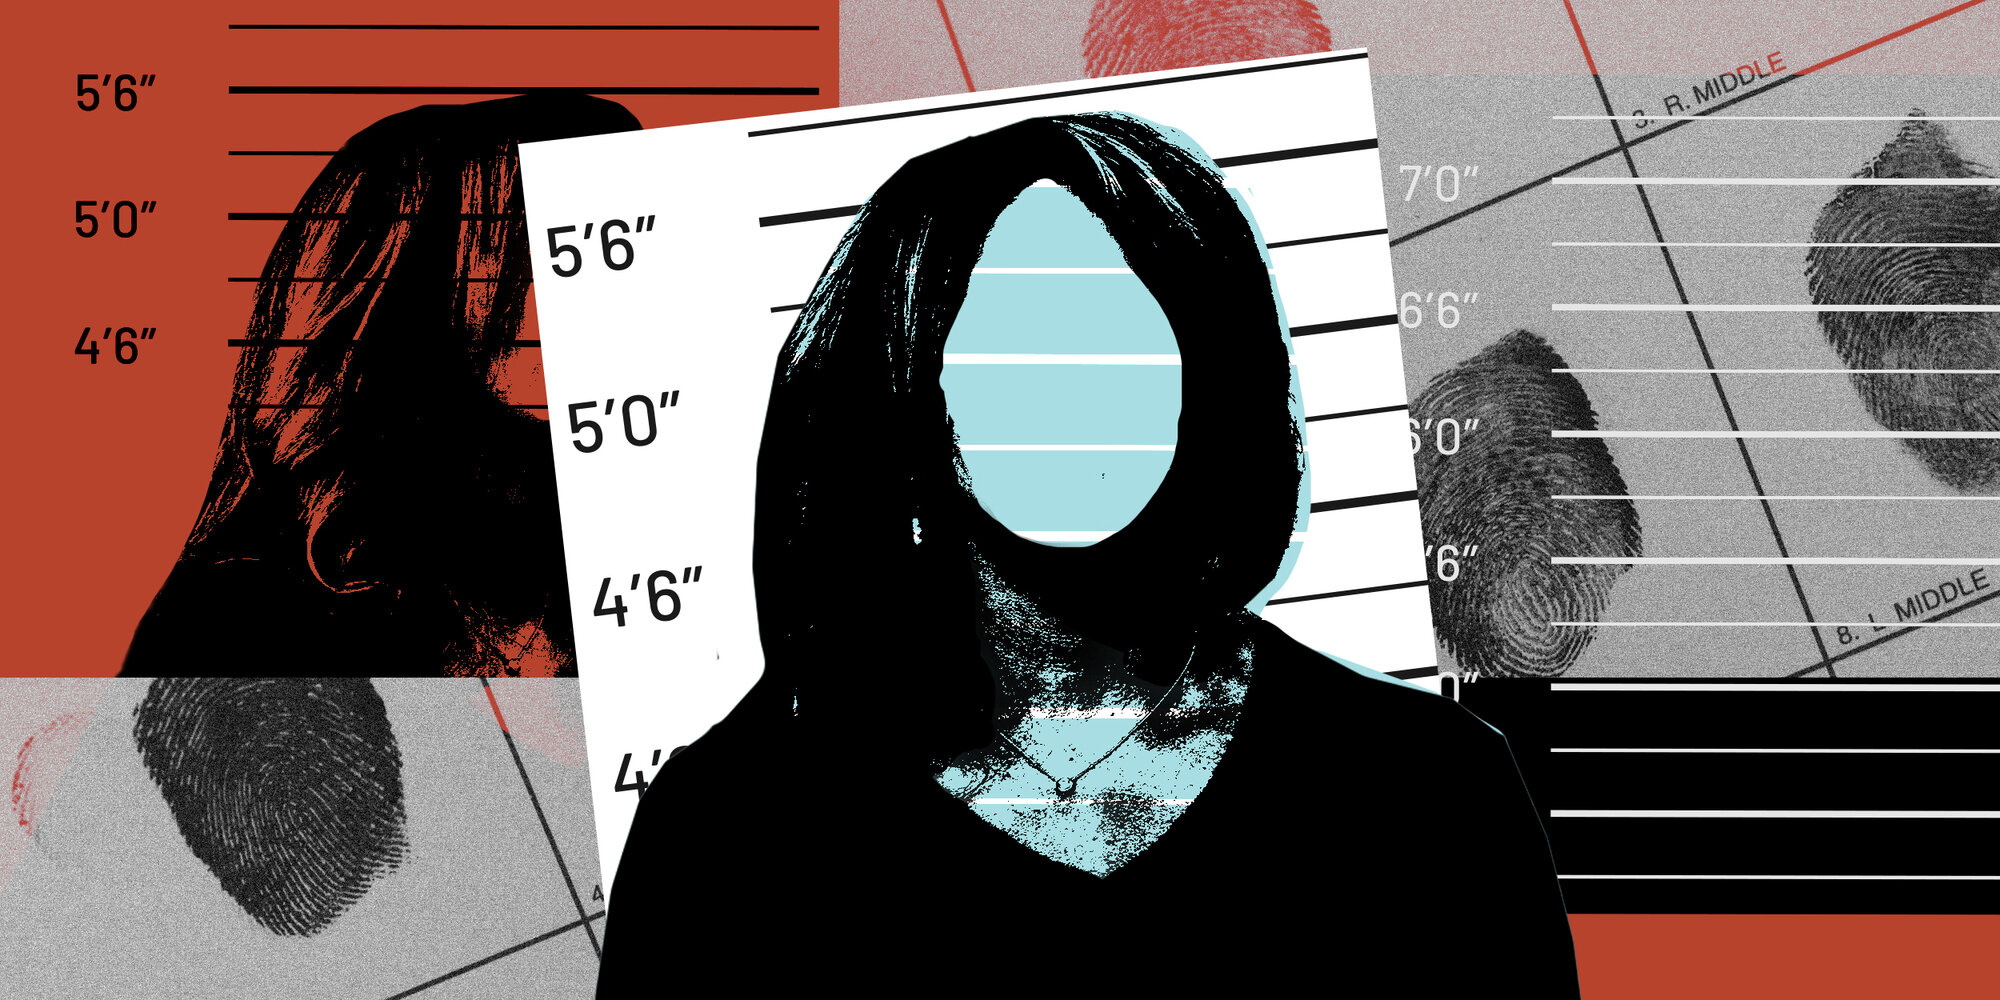 Mugshots Stay Online Forever. Some Say the Police Should Stop Making Them Public.